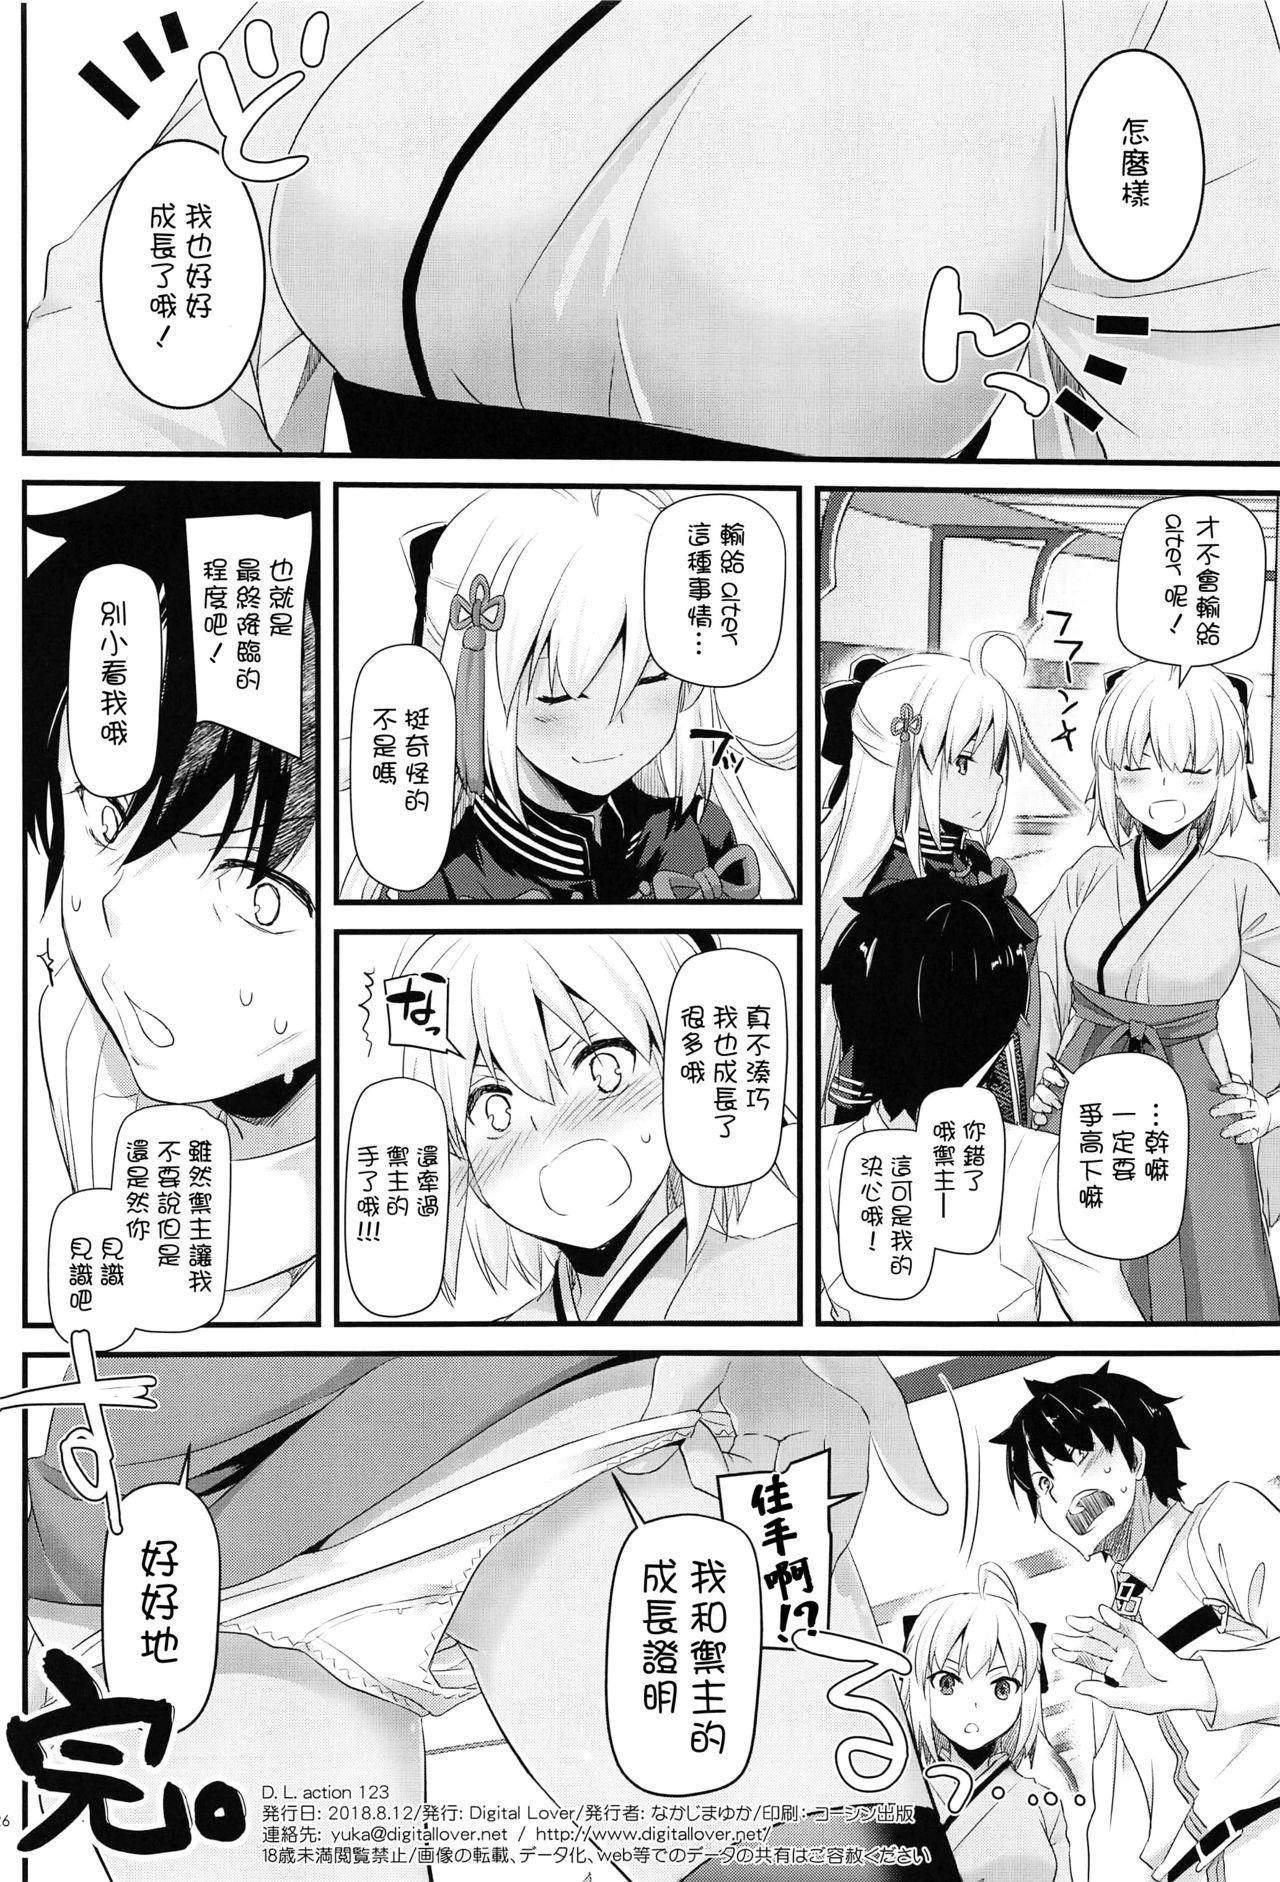 Cousin D.L. action 123 - Fate grand order Eng Sub - Page 26